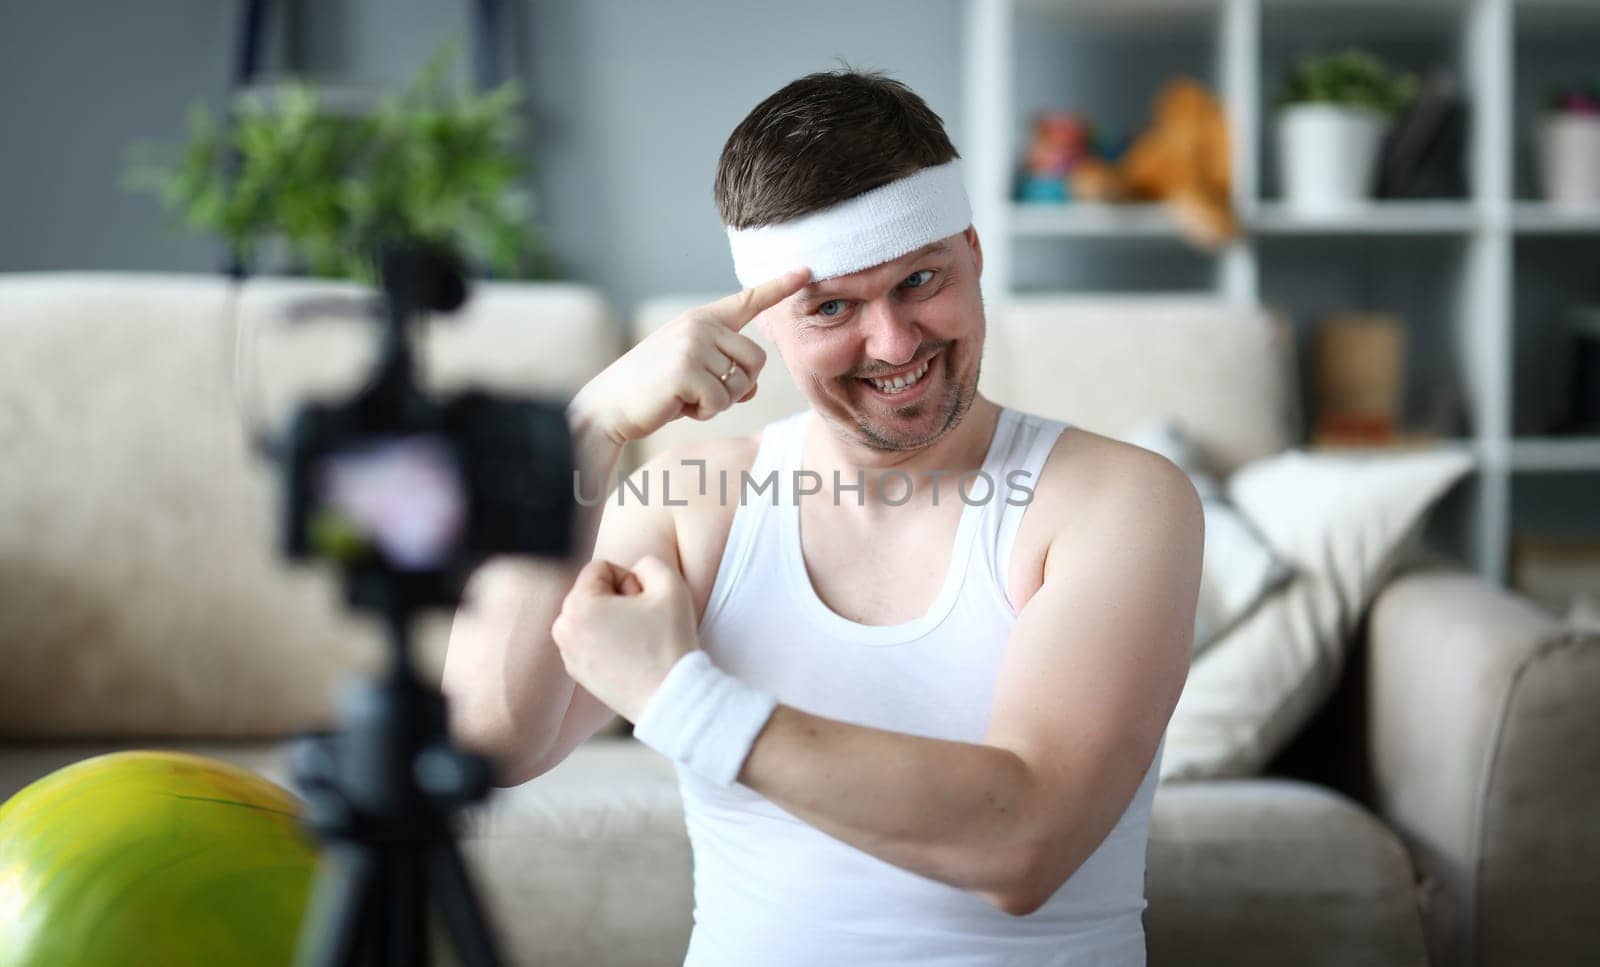 Smiling Vlogger Show Muscle on Digital Camera. Beard Man Demonstrate Muscle on Hands. Sportsman Recording Video on Professional Camcorder for Sport Vlog. Happy Male Shooting Fitness Exercise at Home